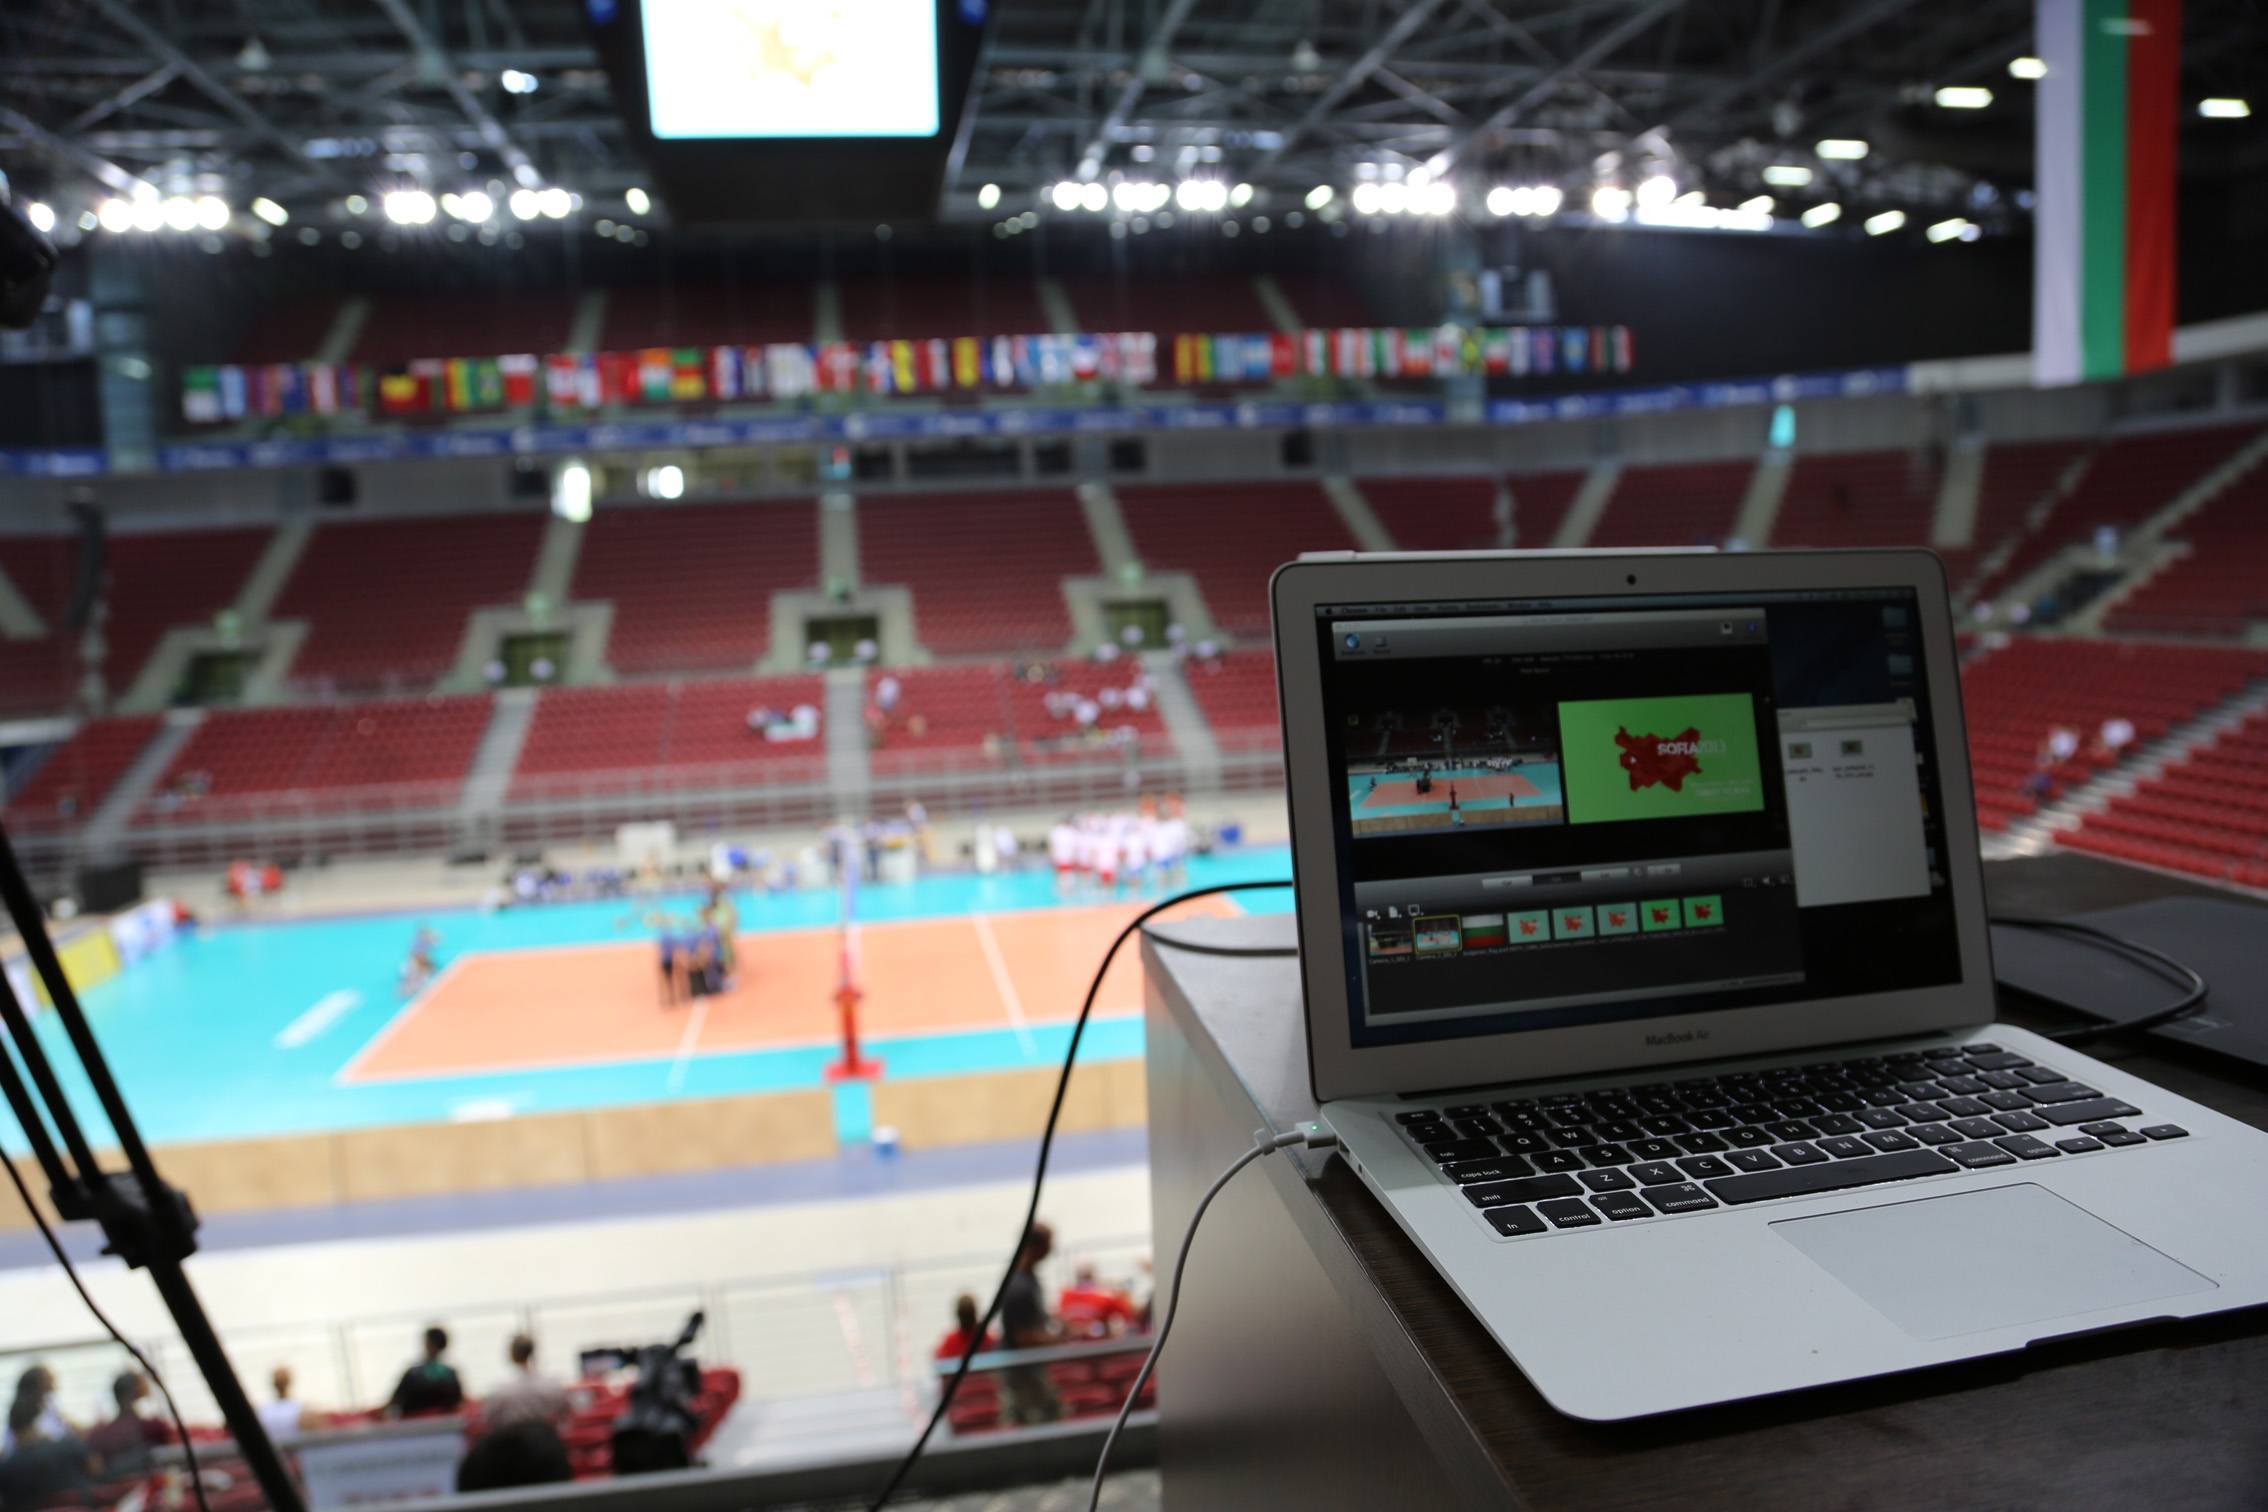 Media Team to provide live coverage of the International multi-sport event of Summer Deaflympic Game in Sofia Bulgaria